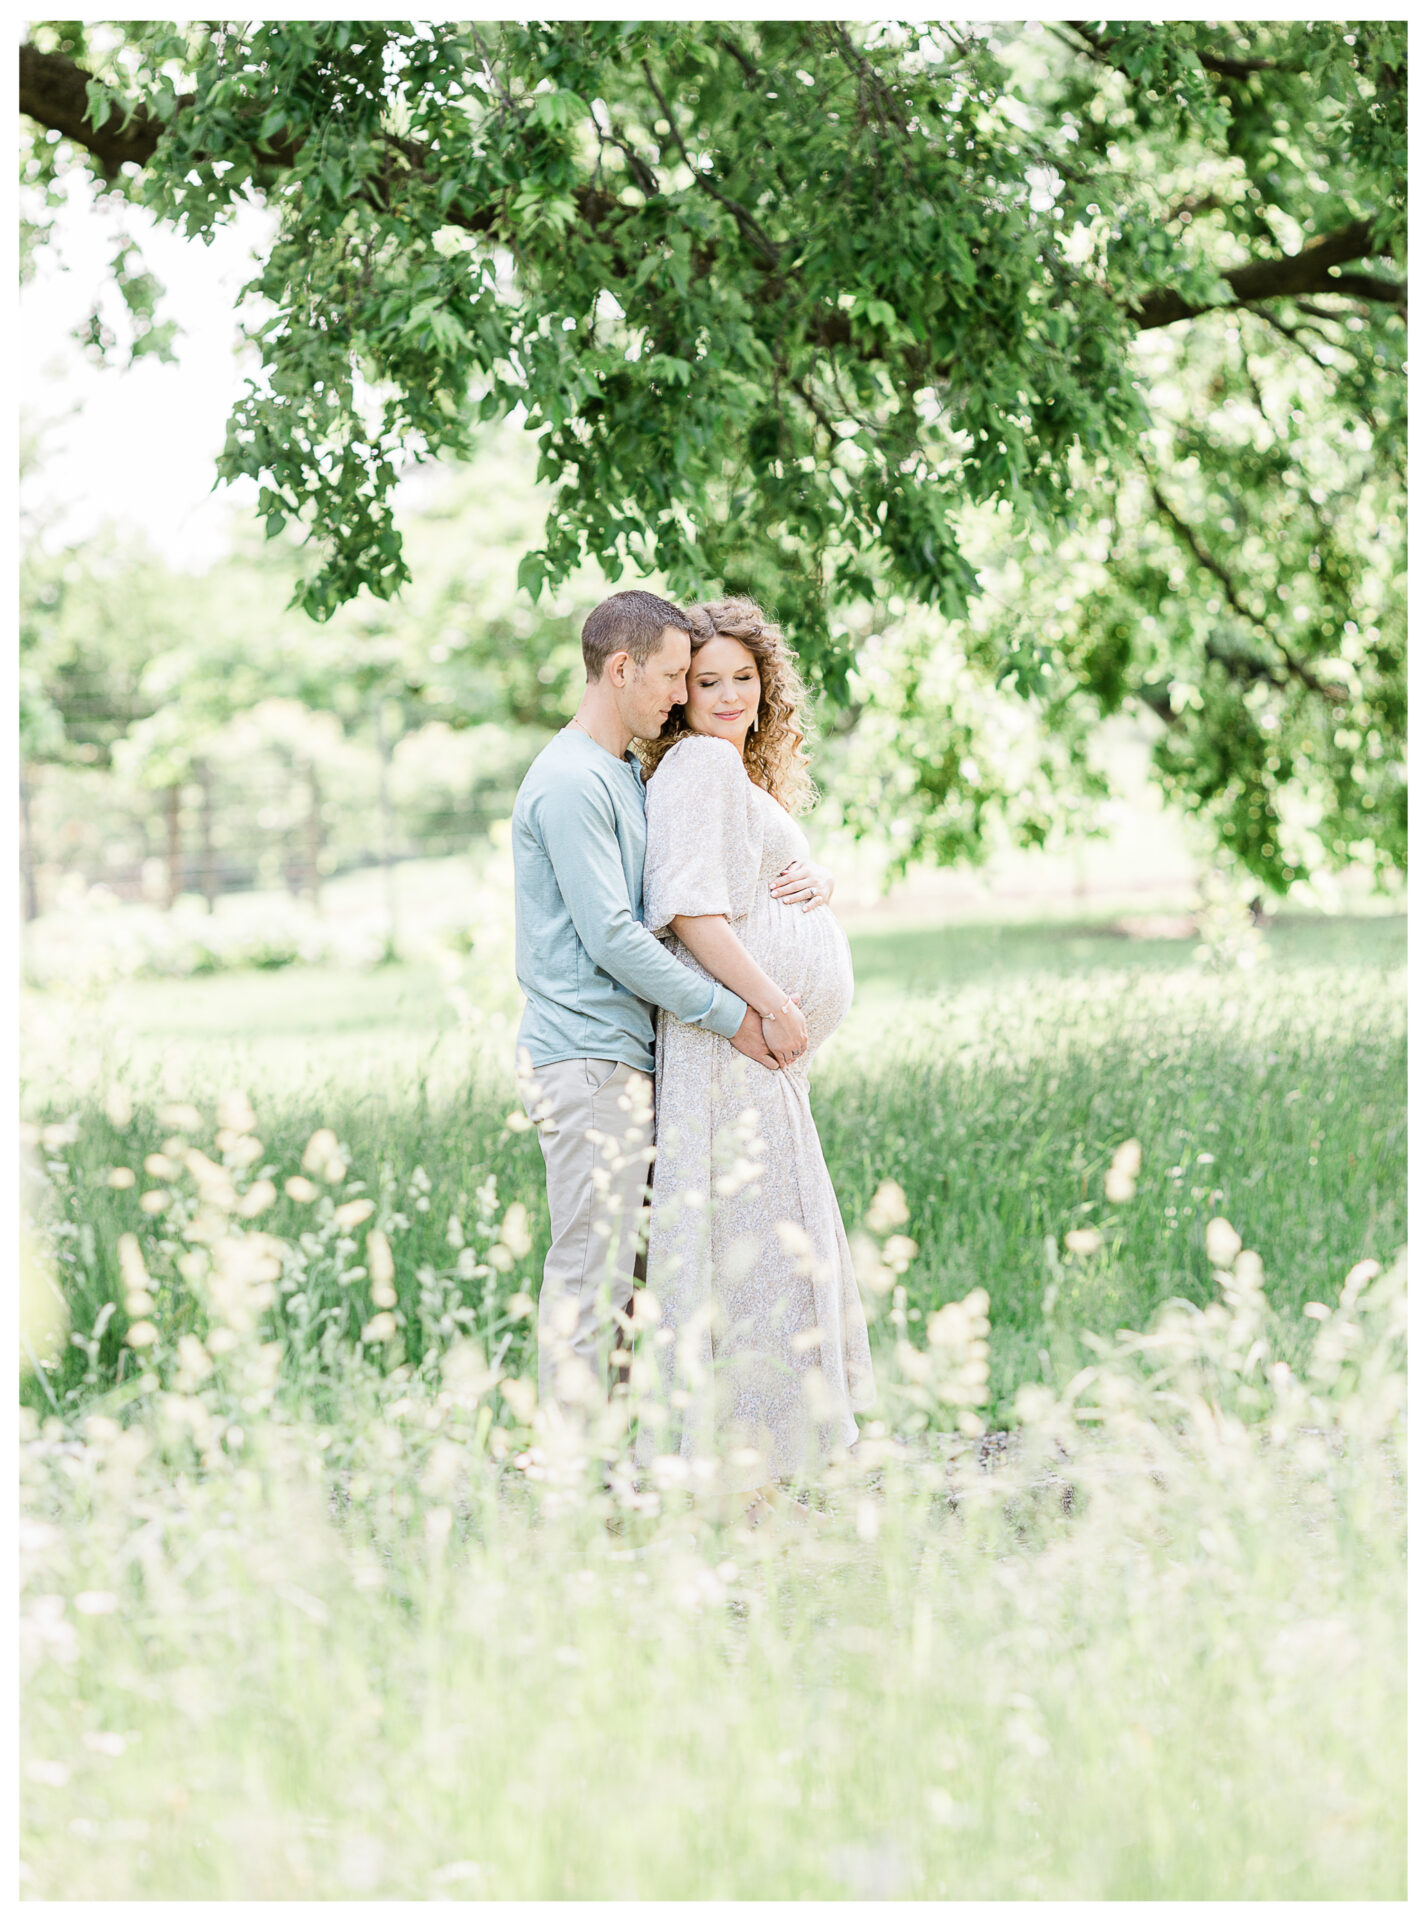 Winter Freire Photography | husband and wife smiling and holding hands in a field of flowers